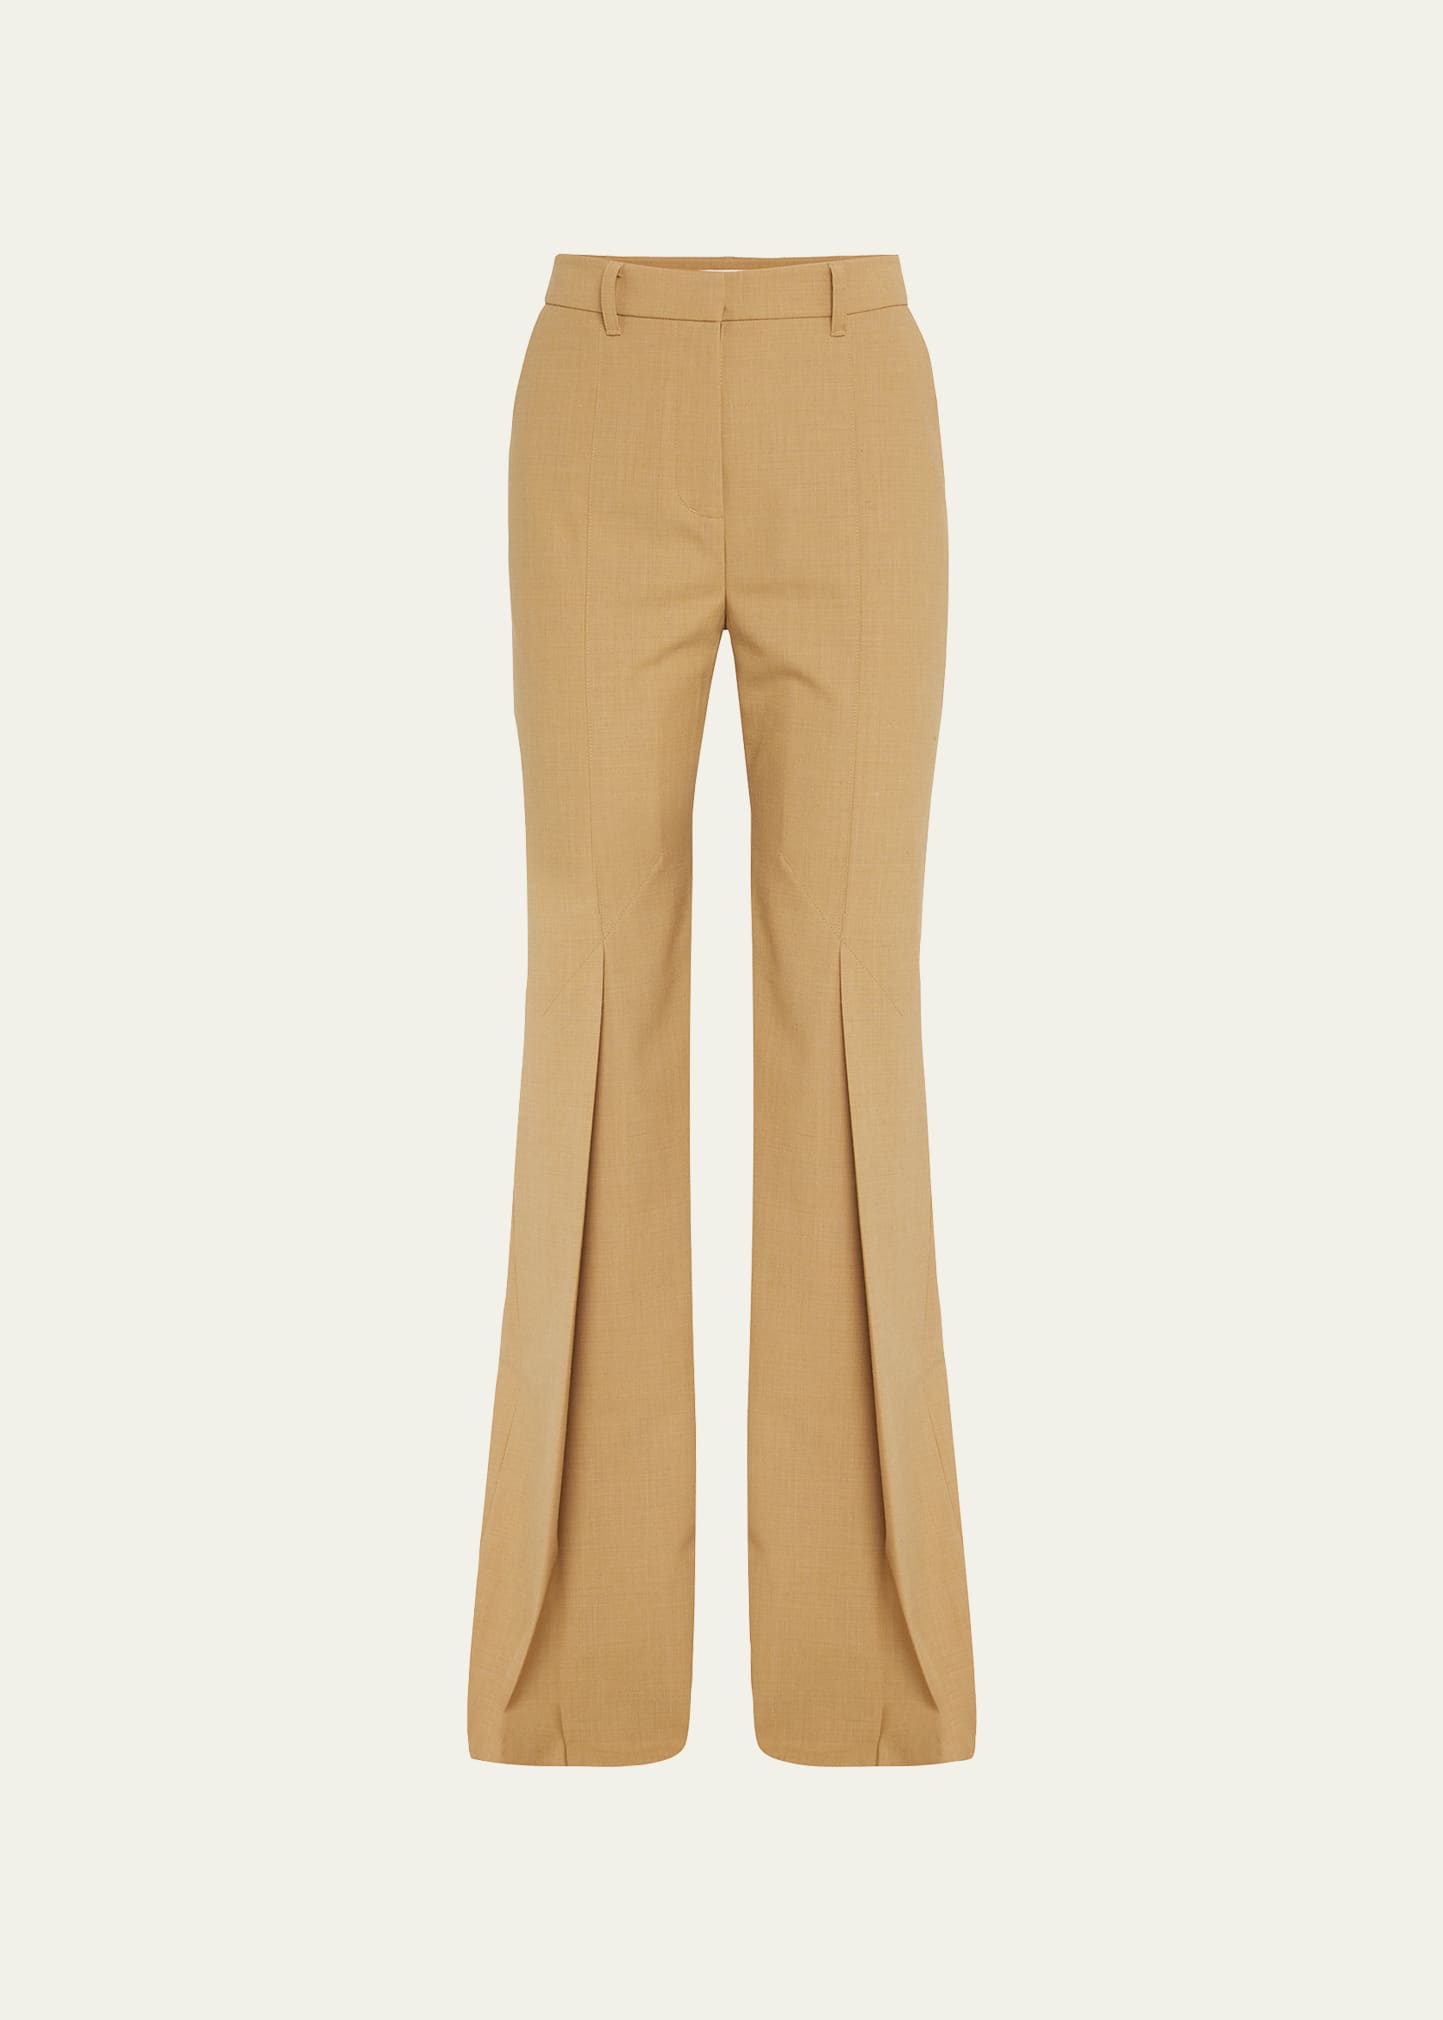 Palmer Harding Pleated Wool-blend Precision Trousers In Camel Wool